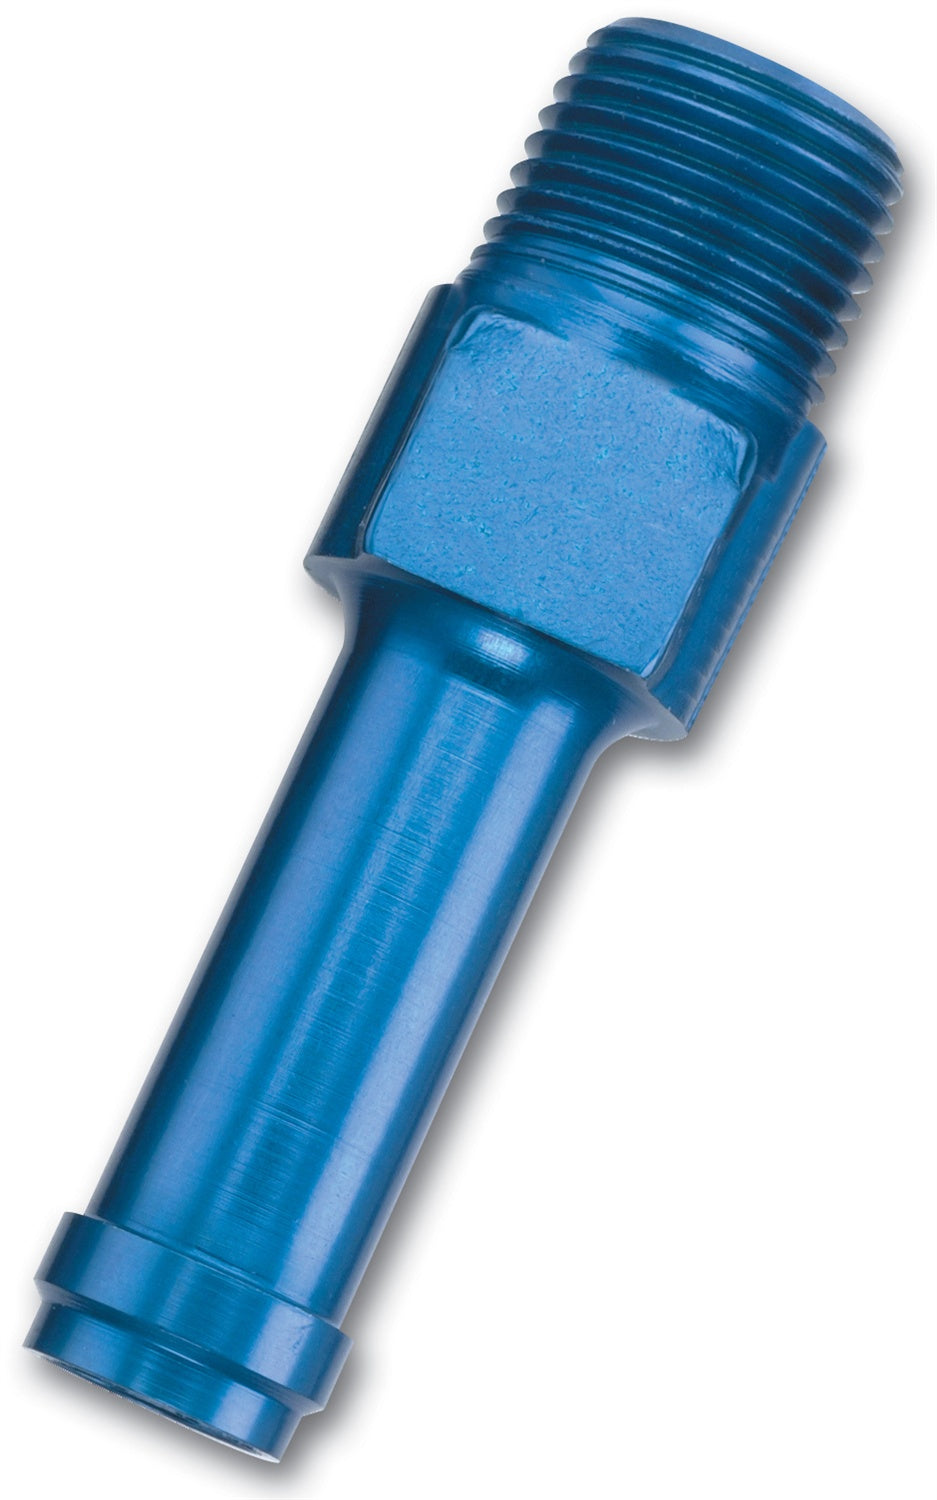 663030 | ADATPER FITTING 1/2" NPT MALE TO 5/8" OD MALE TUBE STRAIGHT BLUE ANODIZED